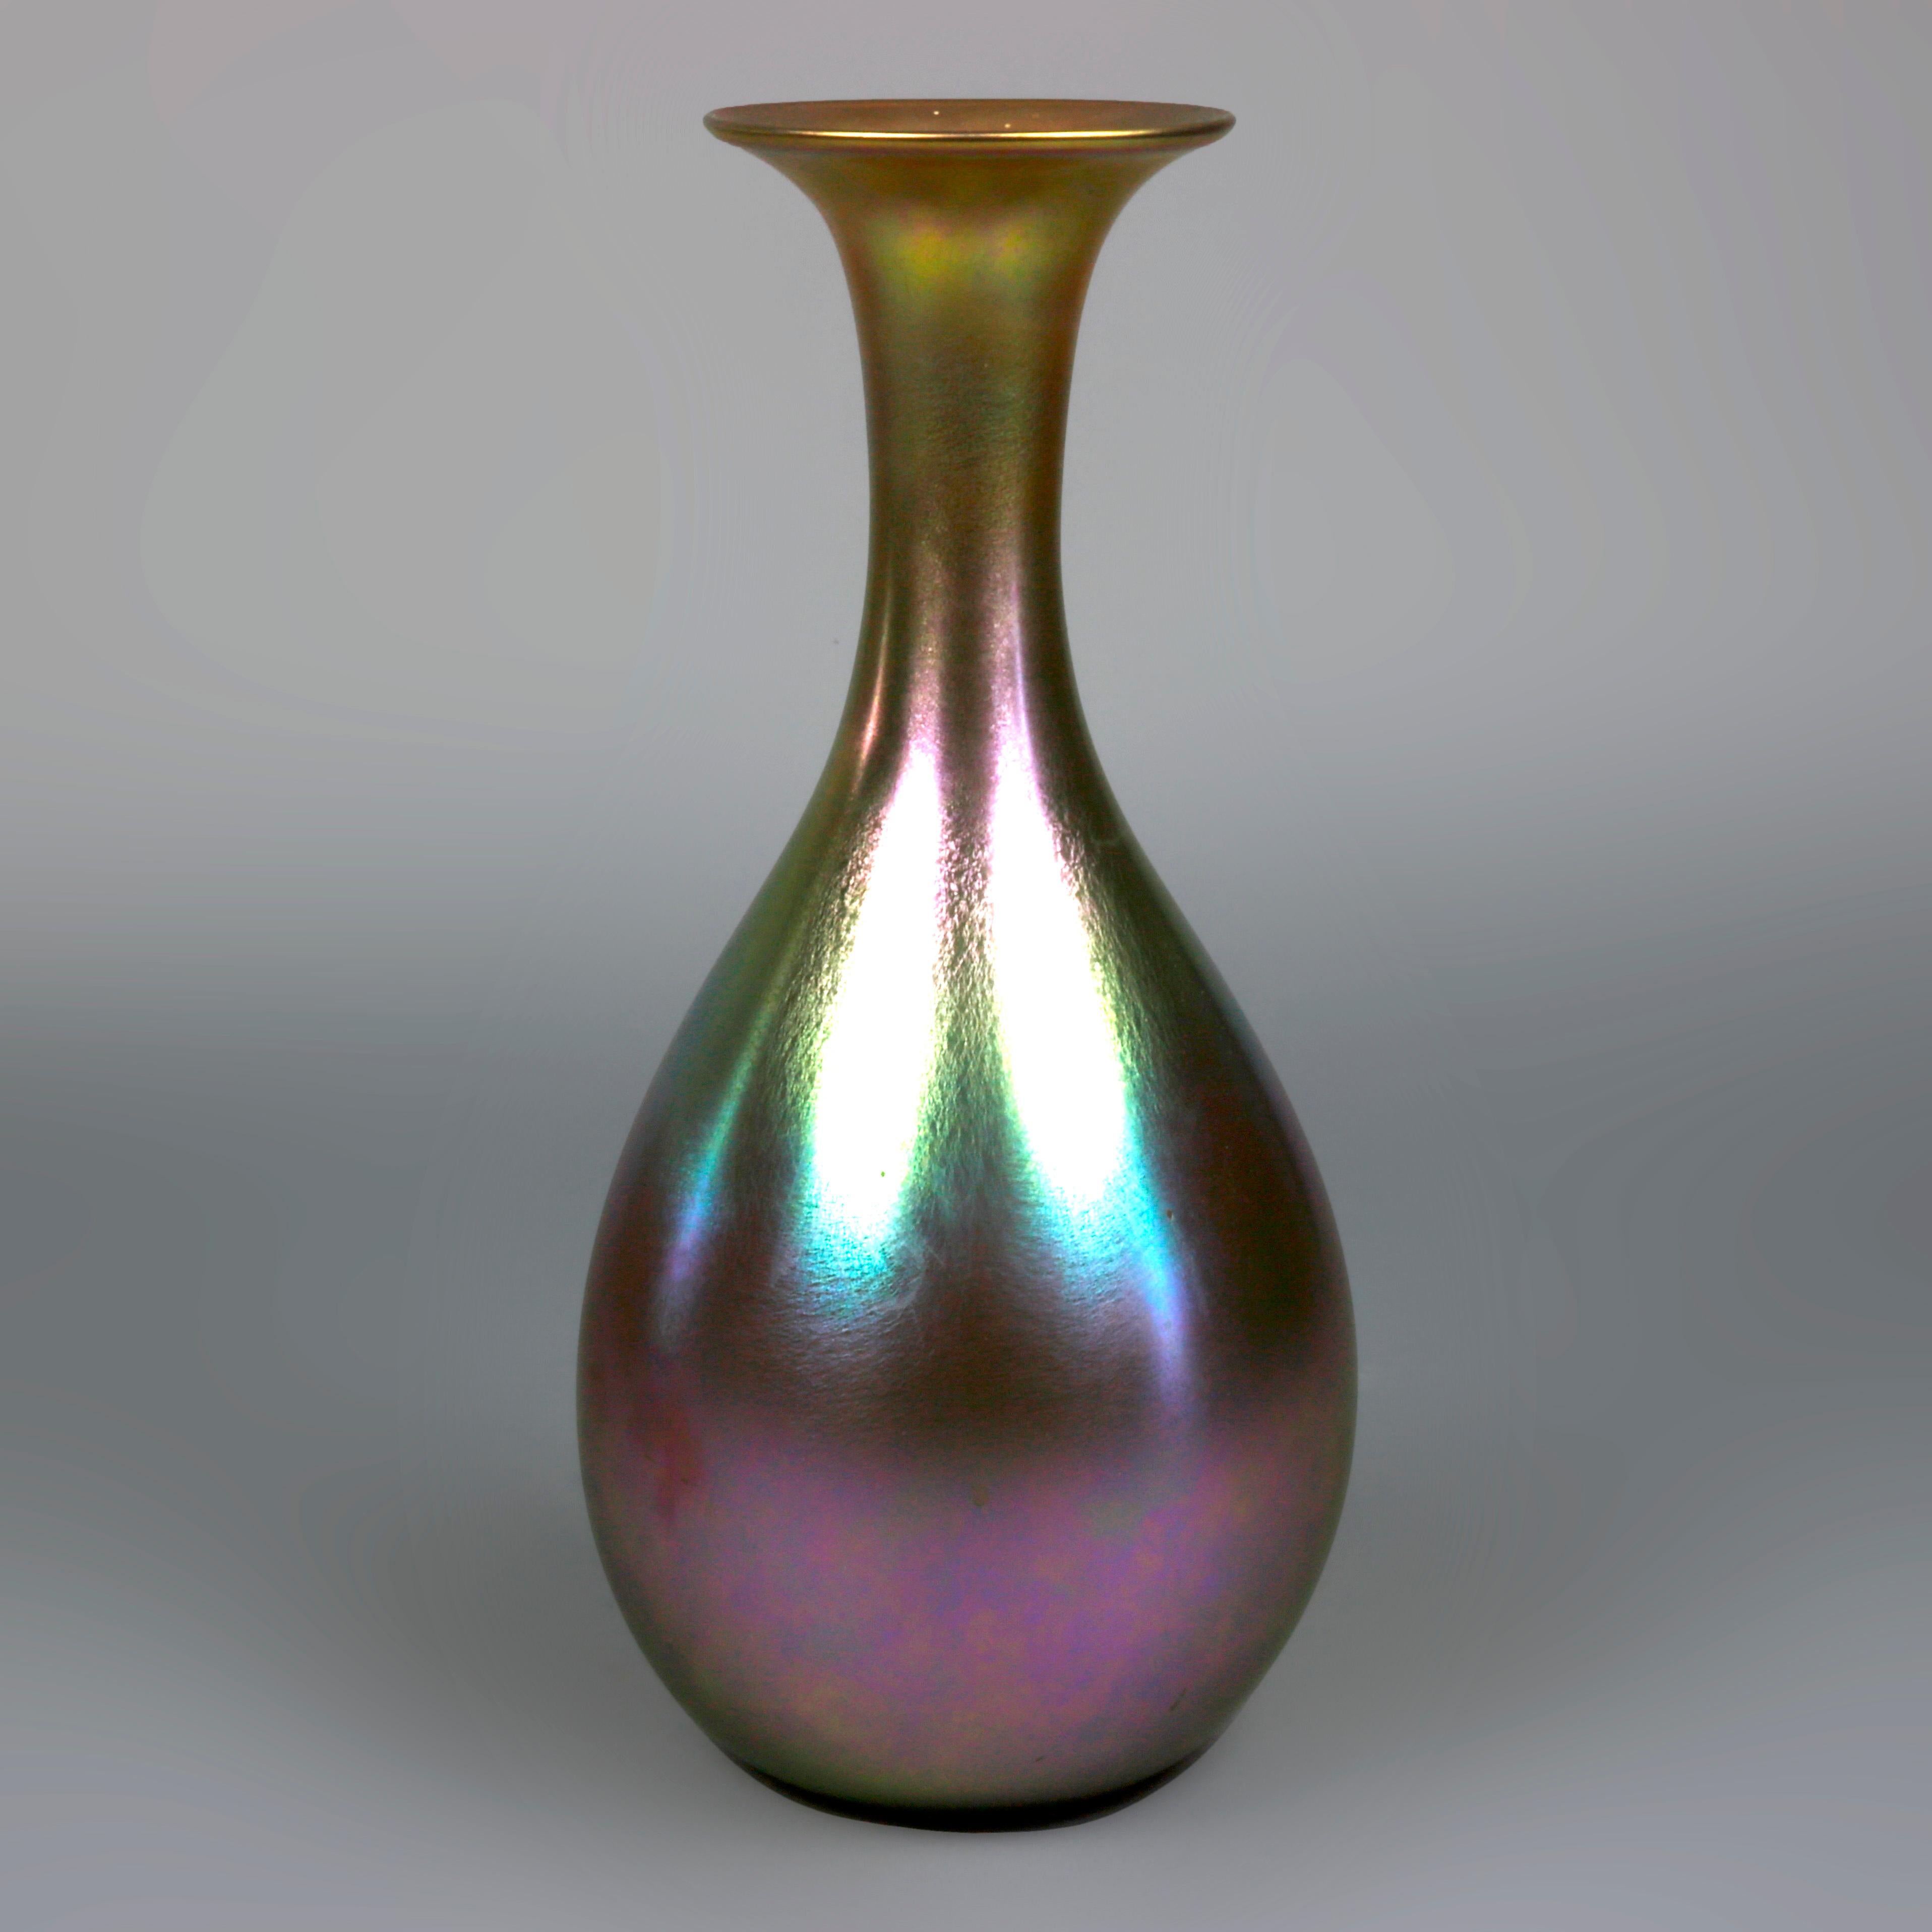 Antique and large Art Nouveau art glass vase by Quezal offers blue, gold, and purple Aurene finish, signed on base as photographed, circa 1900

Measures- 14.88